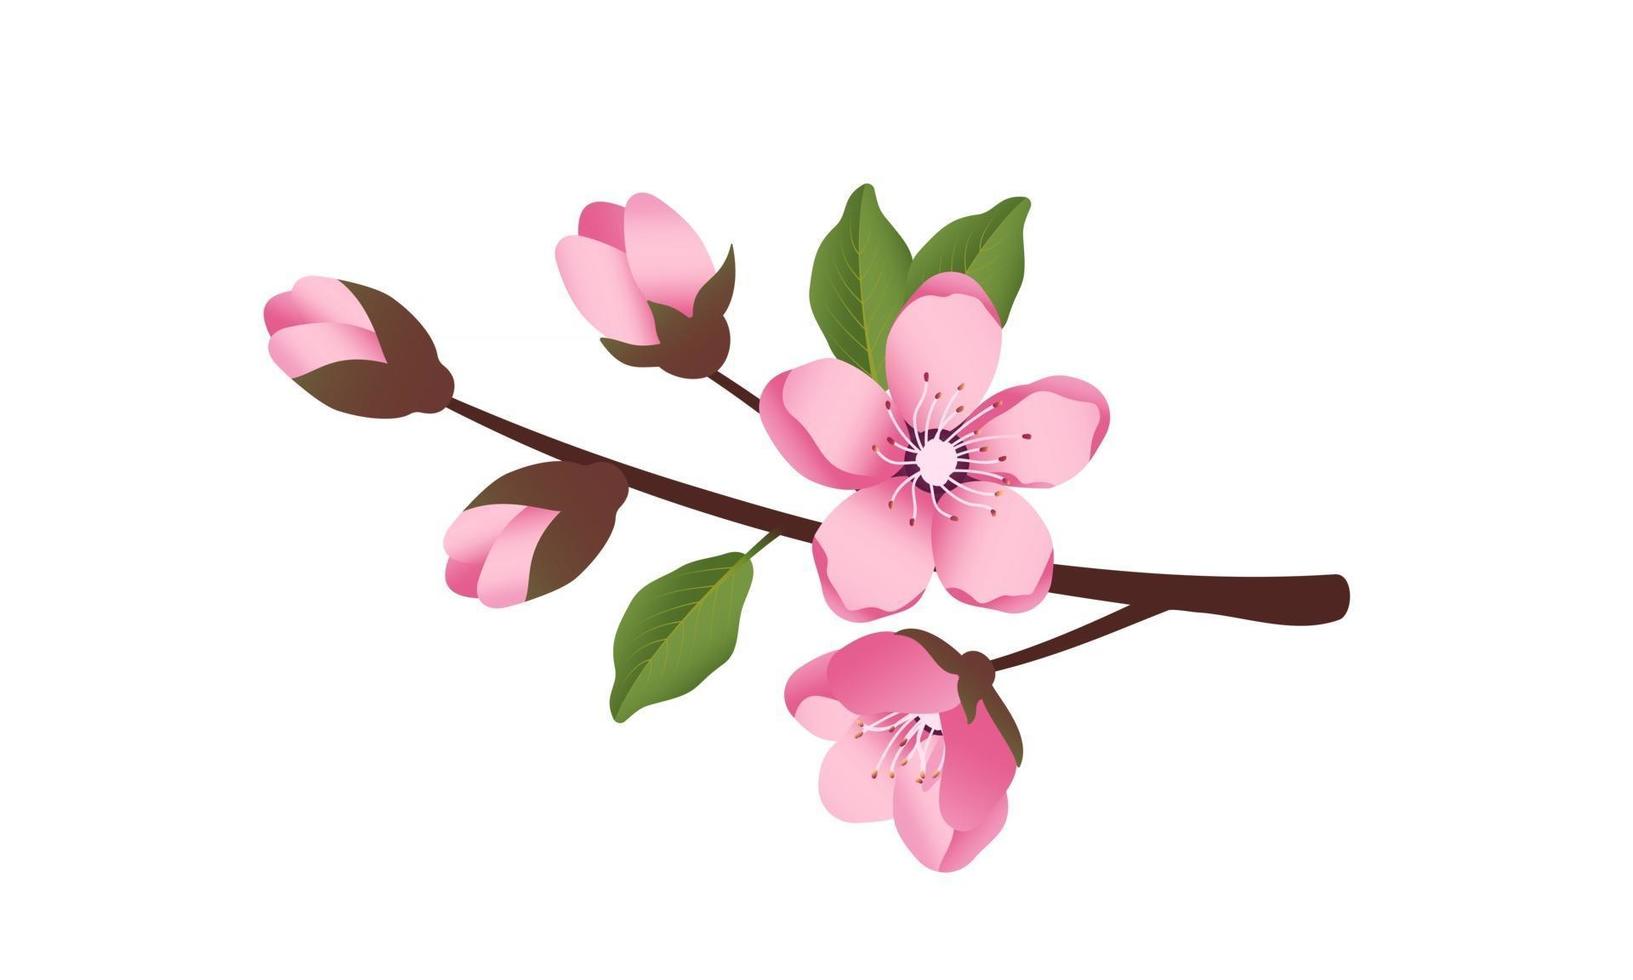 Cute Sakura flowers icon set. The cherry branches have bloomed. vector